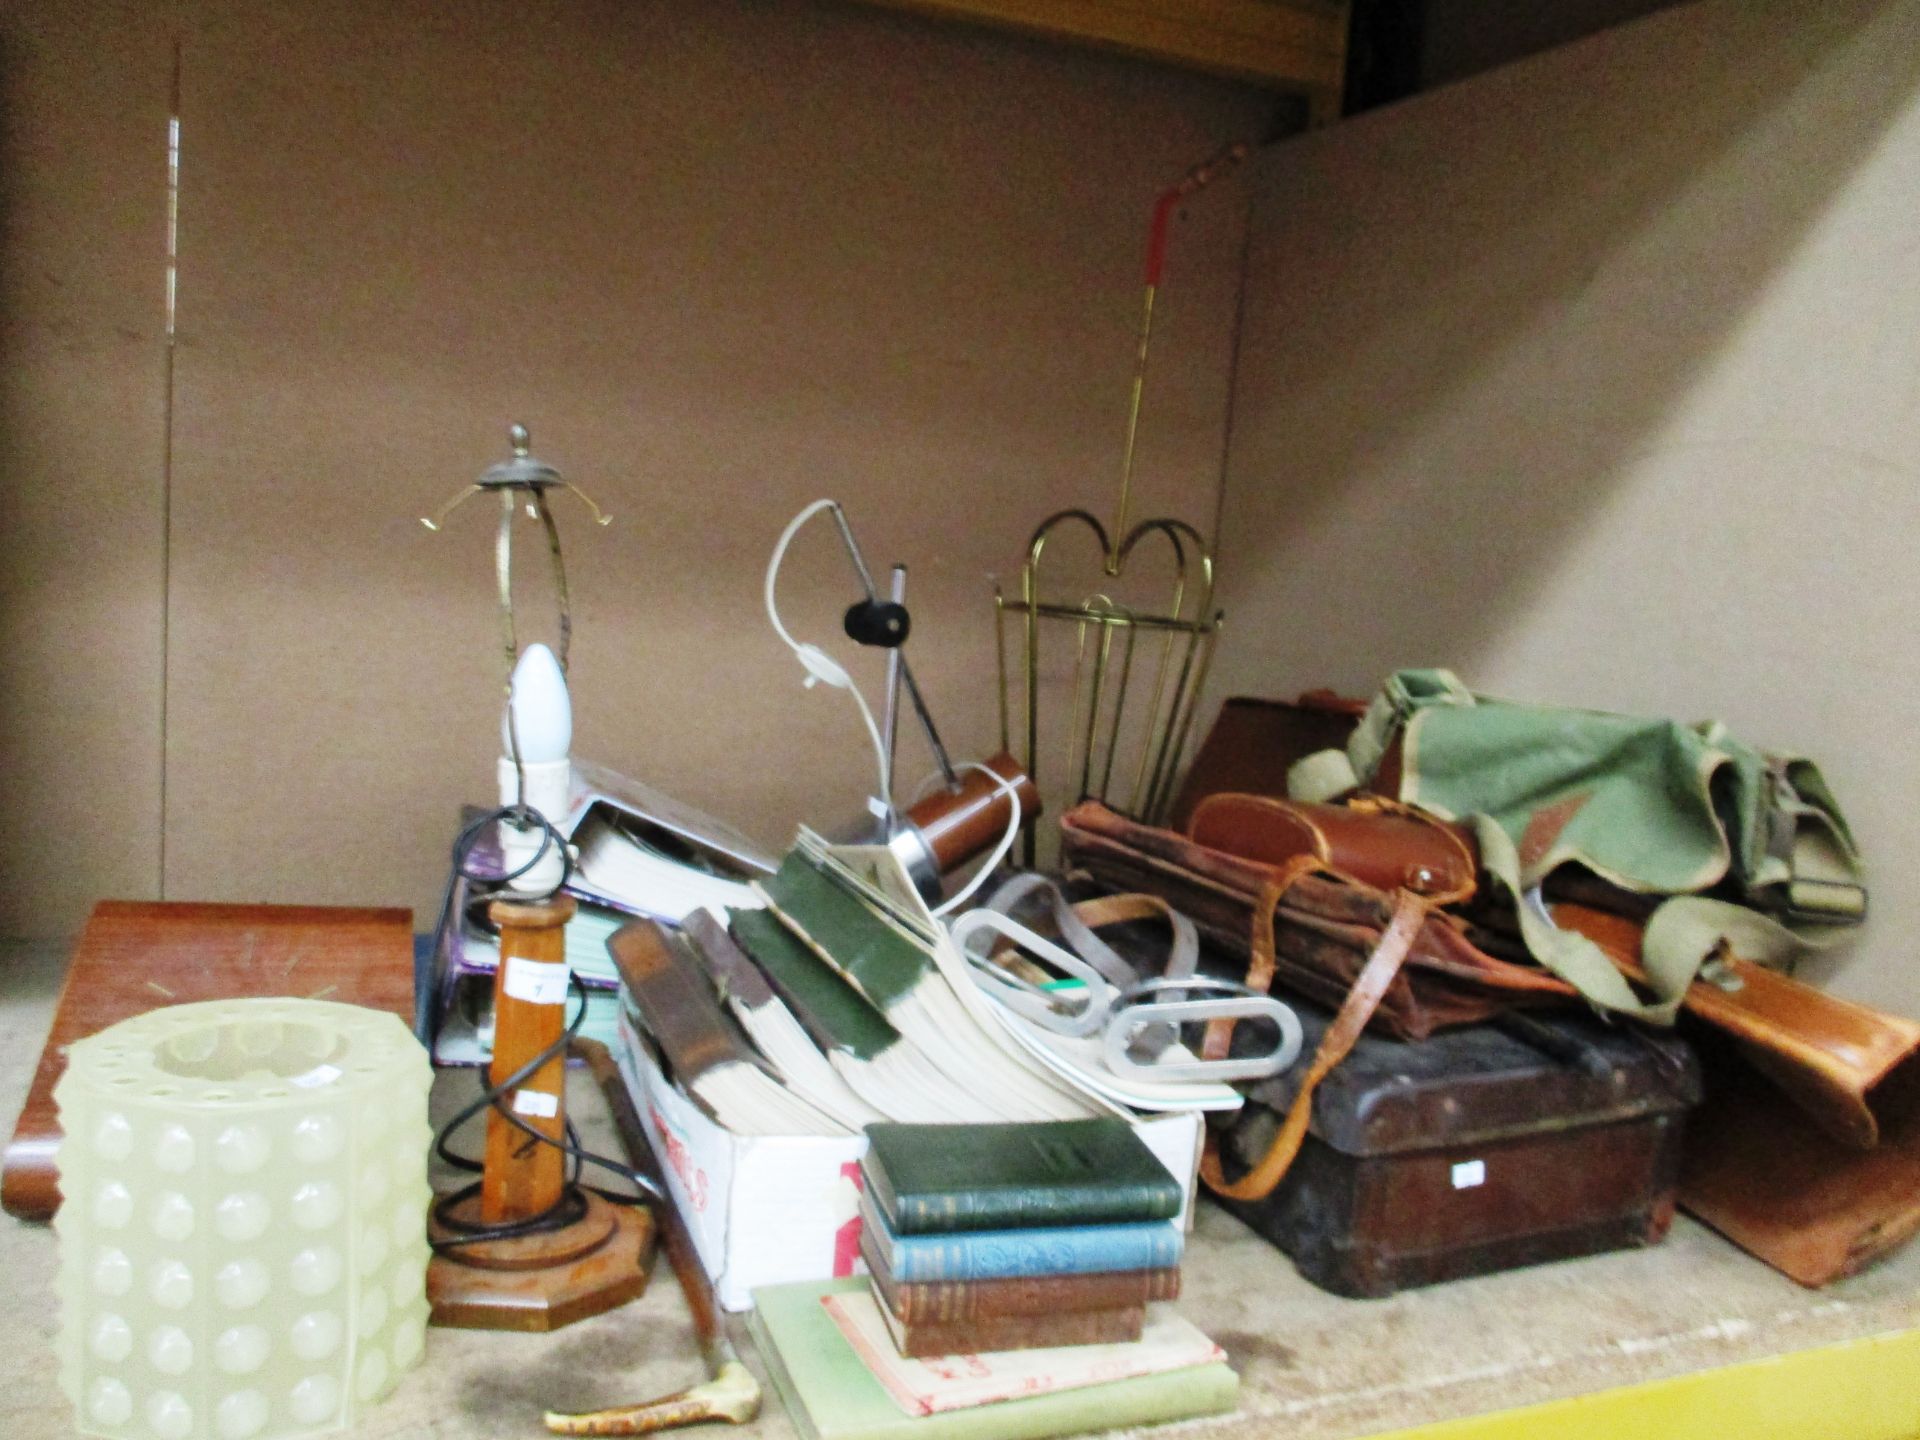 Contents to part of rack - suitcase, briefcase, lamps, clocks,